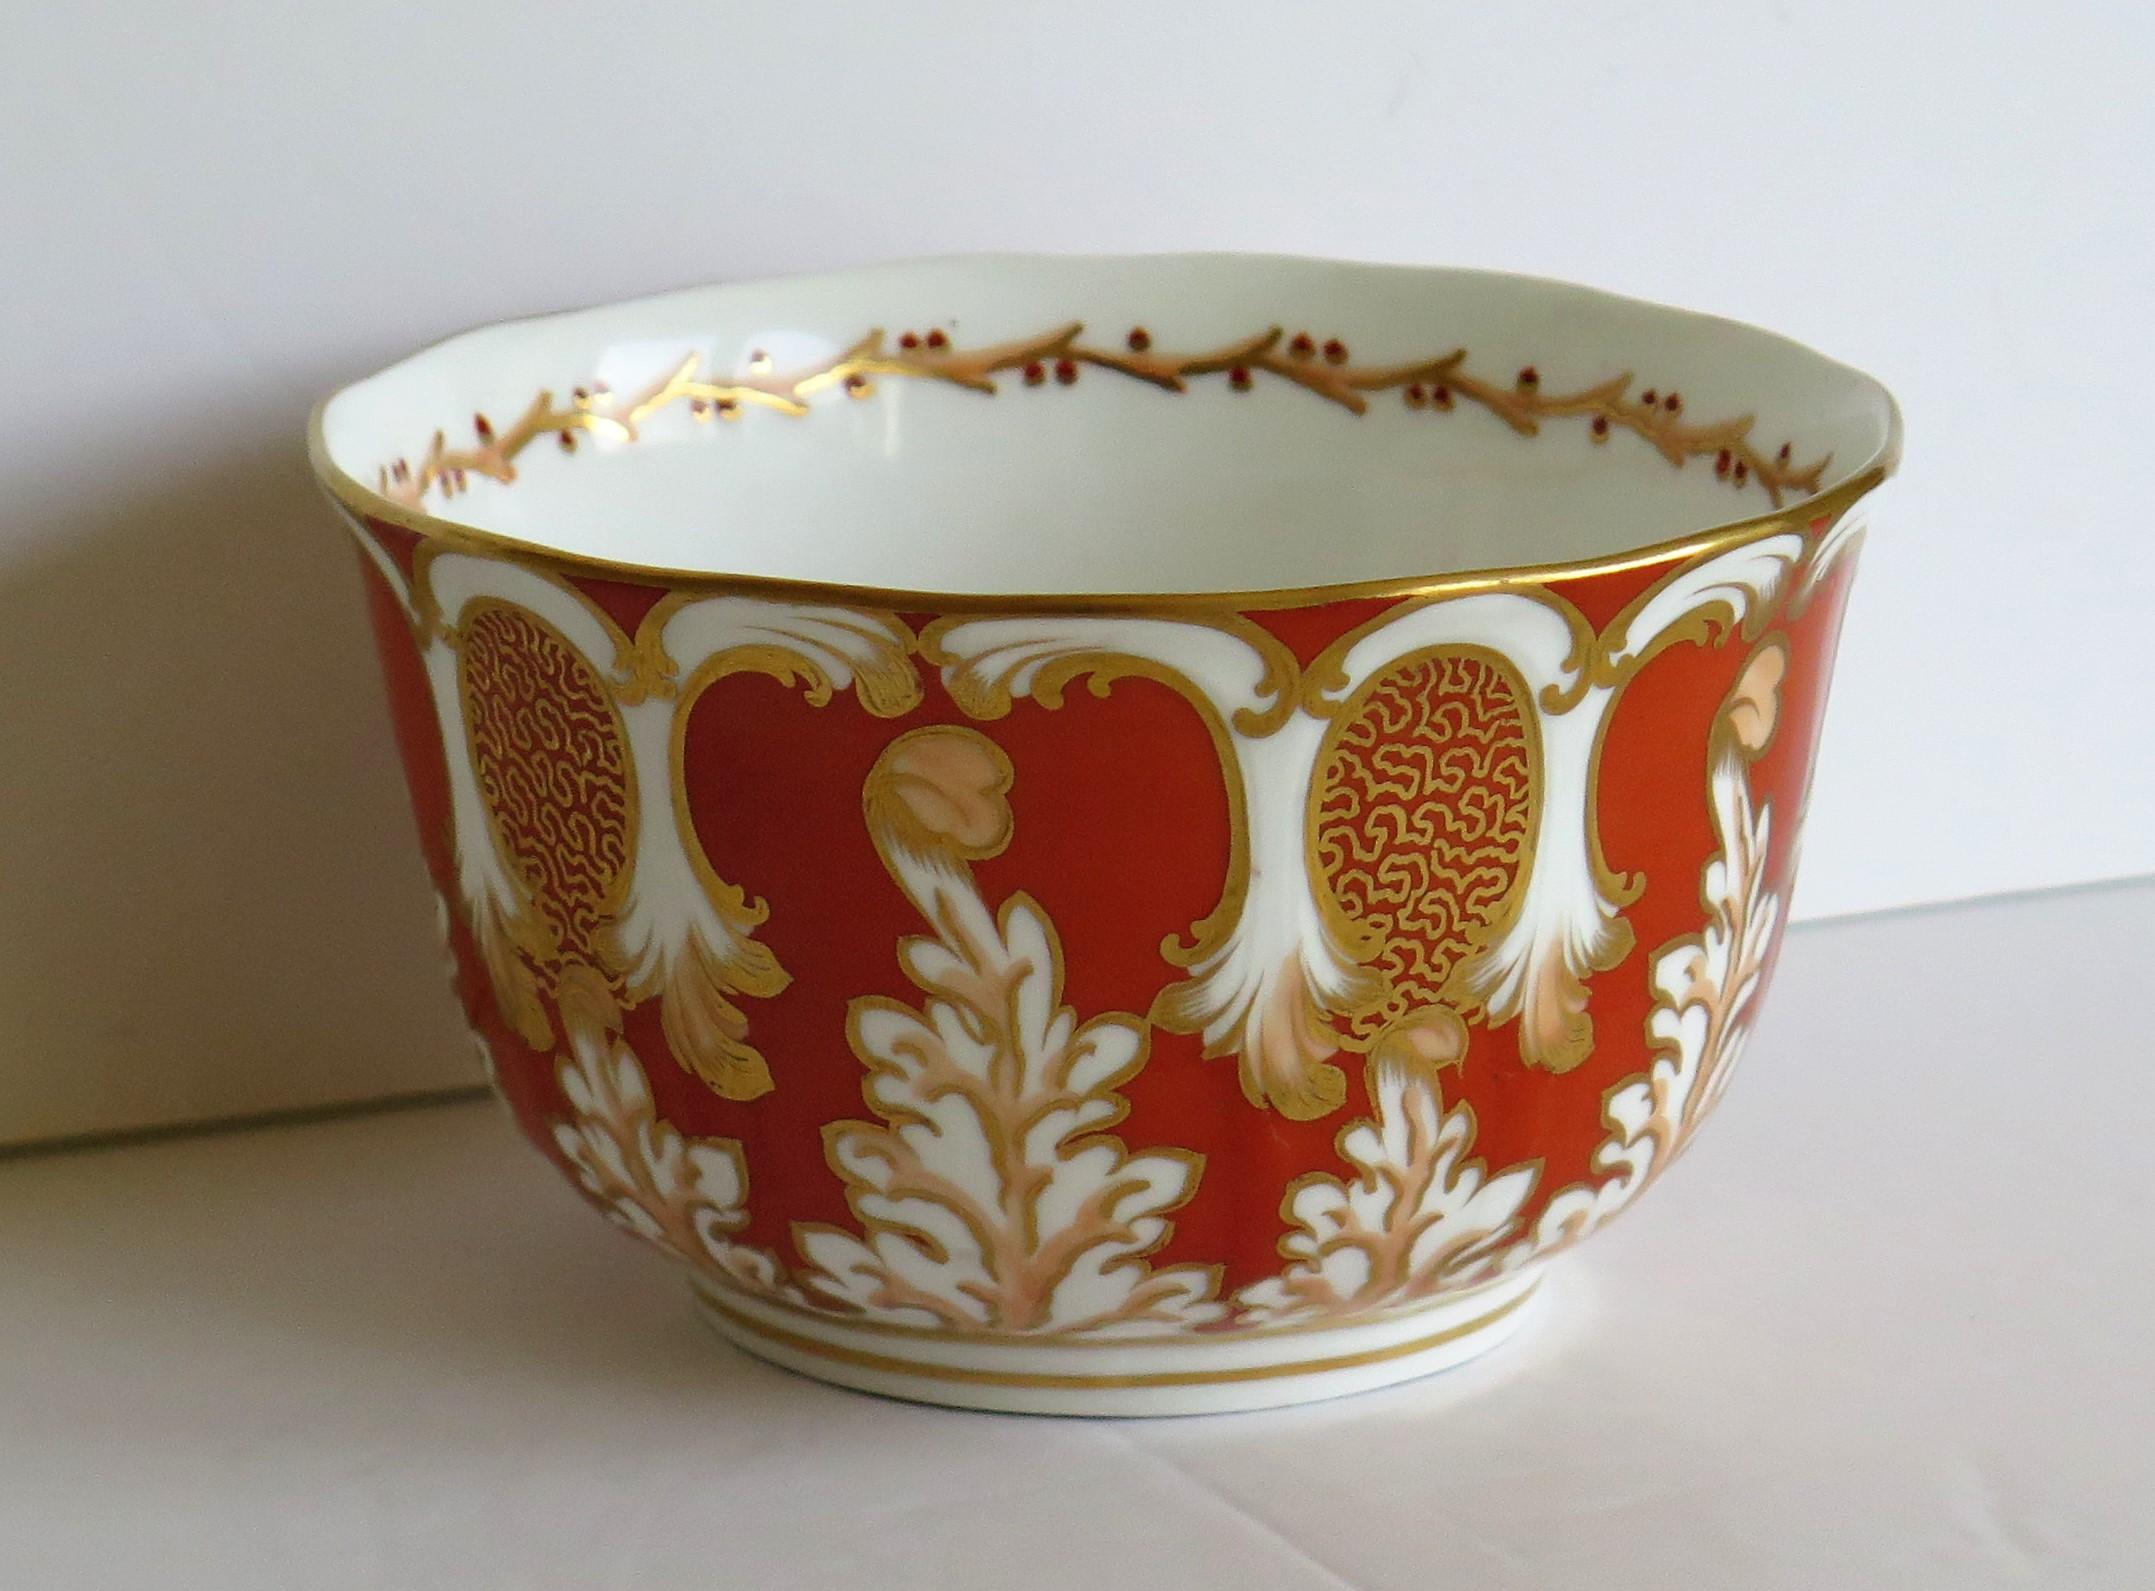 Hand-Painted Davenport Porcelain Bowl in Pattern 2144 Fully Marked to Base, English, 1845